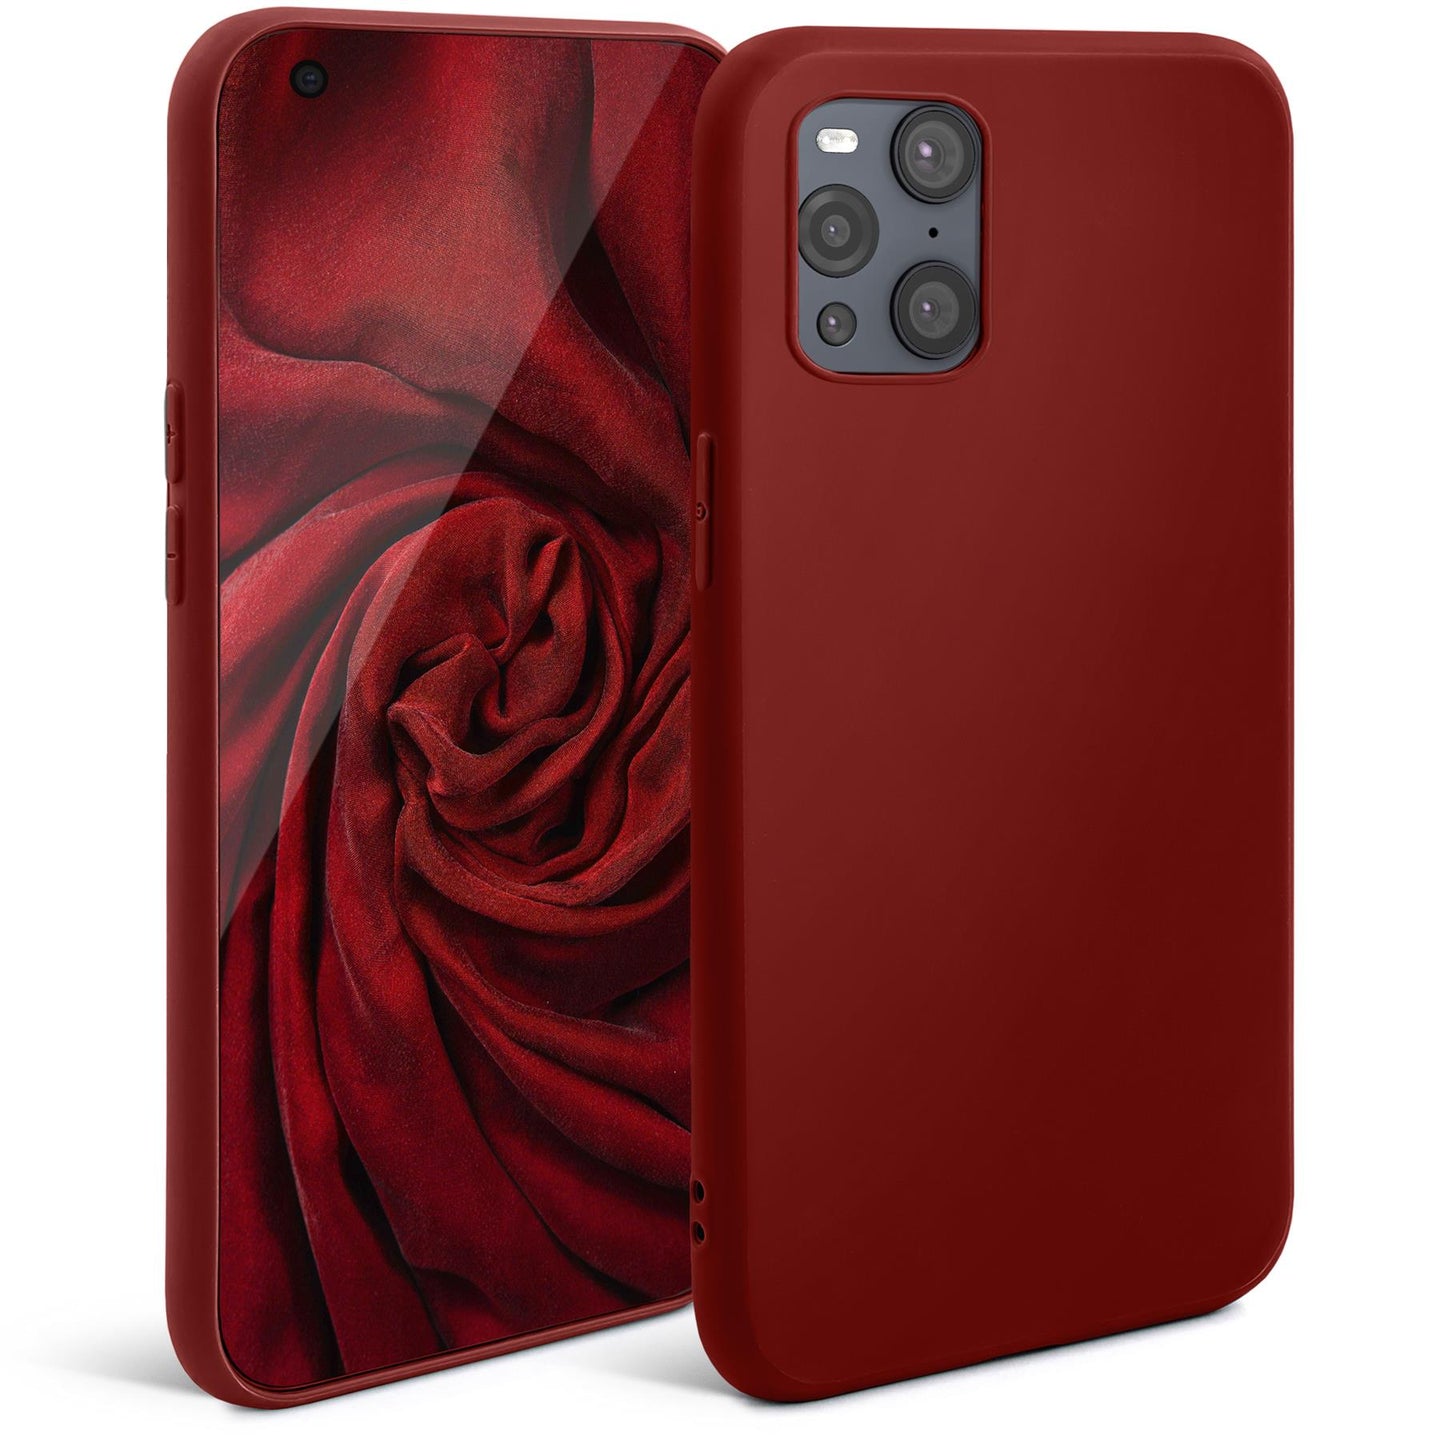 Moozy Minimalist Series Silicone Case for Oppo Find X3 Pro, Wine Red - Matte Finish Lightweight Mobile Phone Case Slim Soft Protective TPU Cover with Matte Surface